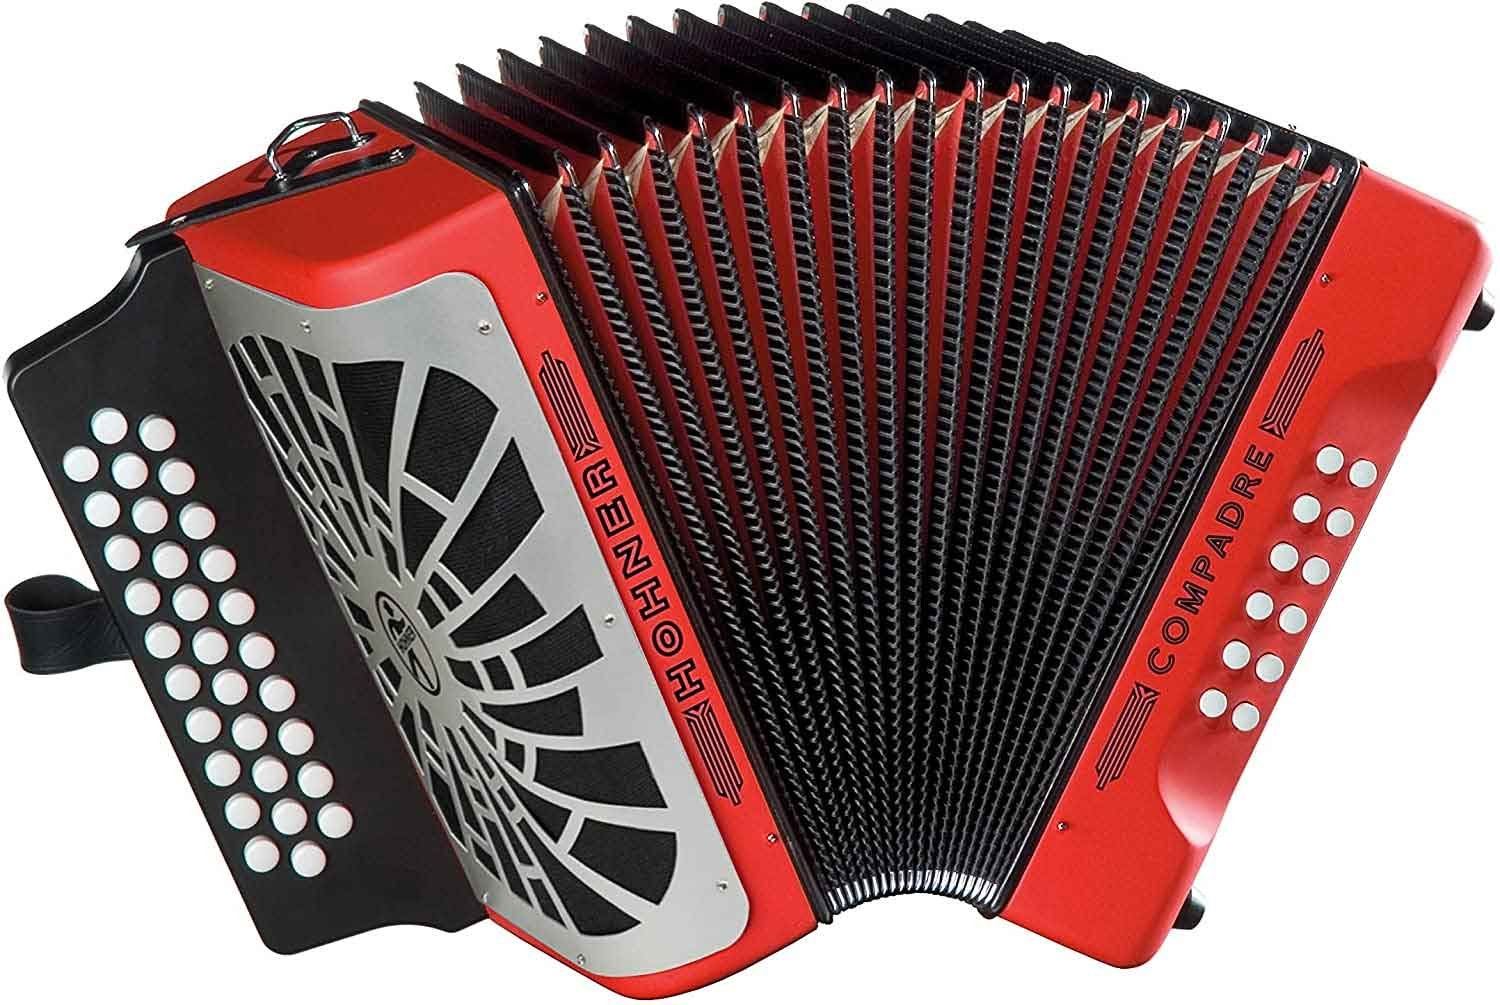 Hohner Compadre GCF 3-Row Diatonic Accordion- Best Accordion for Beginners